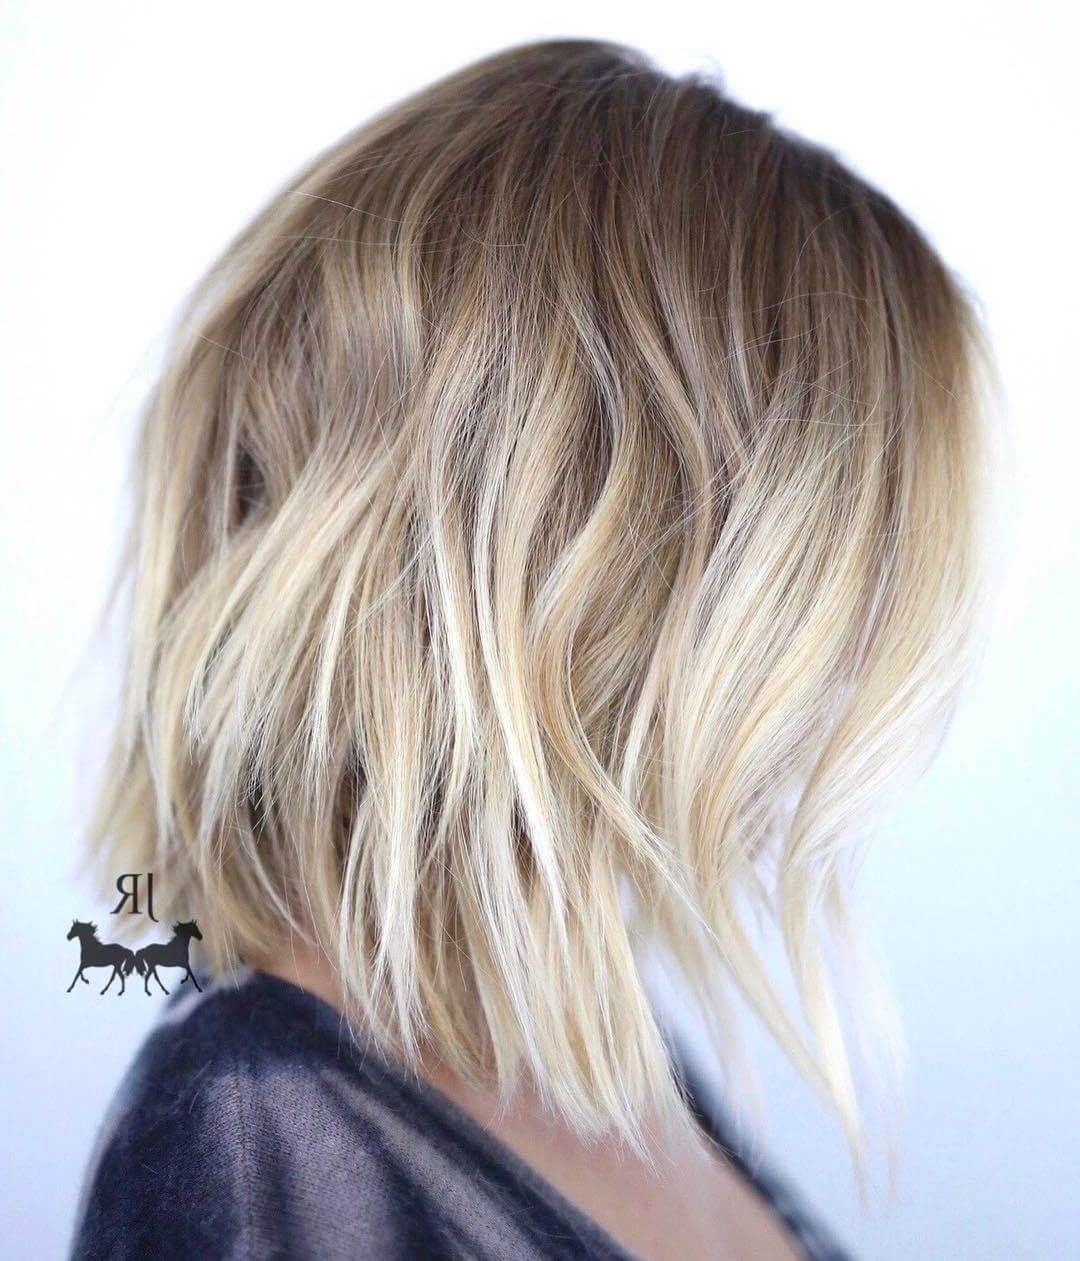 50 Fresh Short Blonde Hair Ideas To Update Your Style In 2018 Intended For 2017 Curly Highlighted Blonde Bob Hairstyles (View 6 of 20)